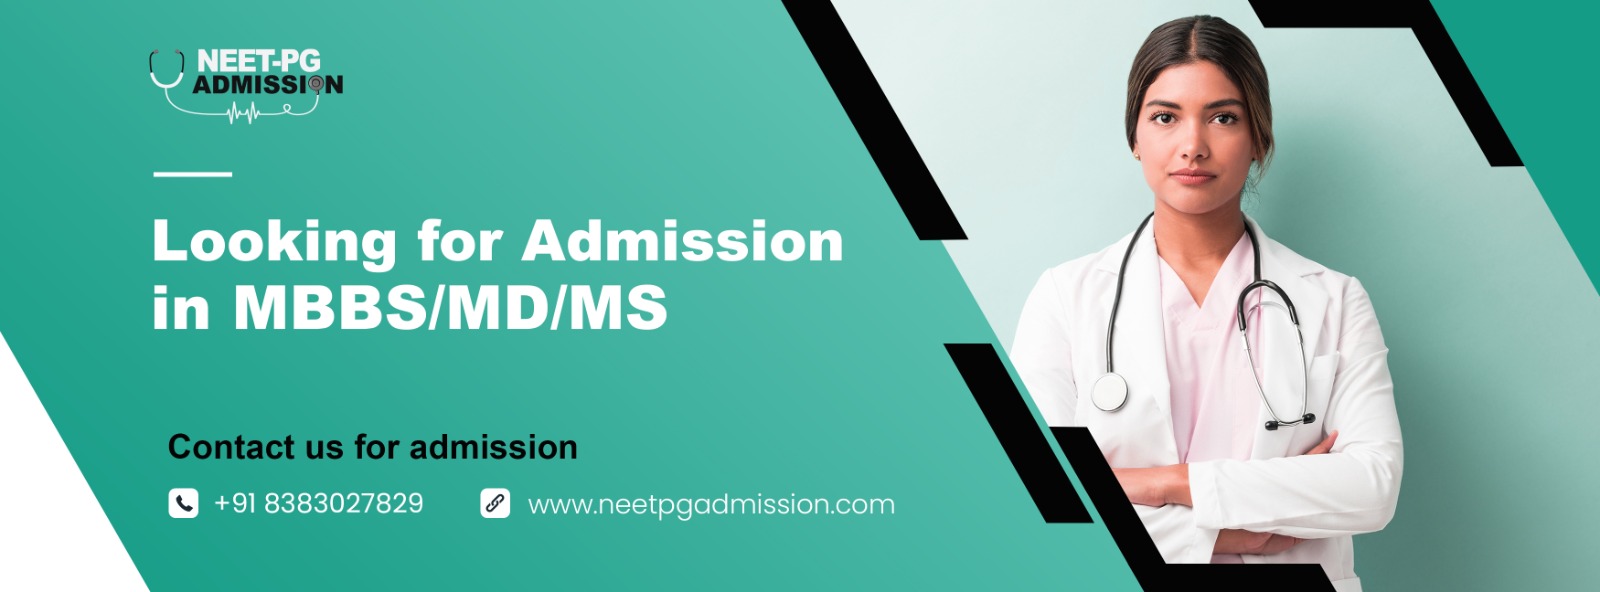 take admission in mbbs olympia education